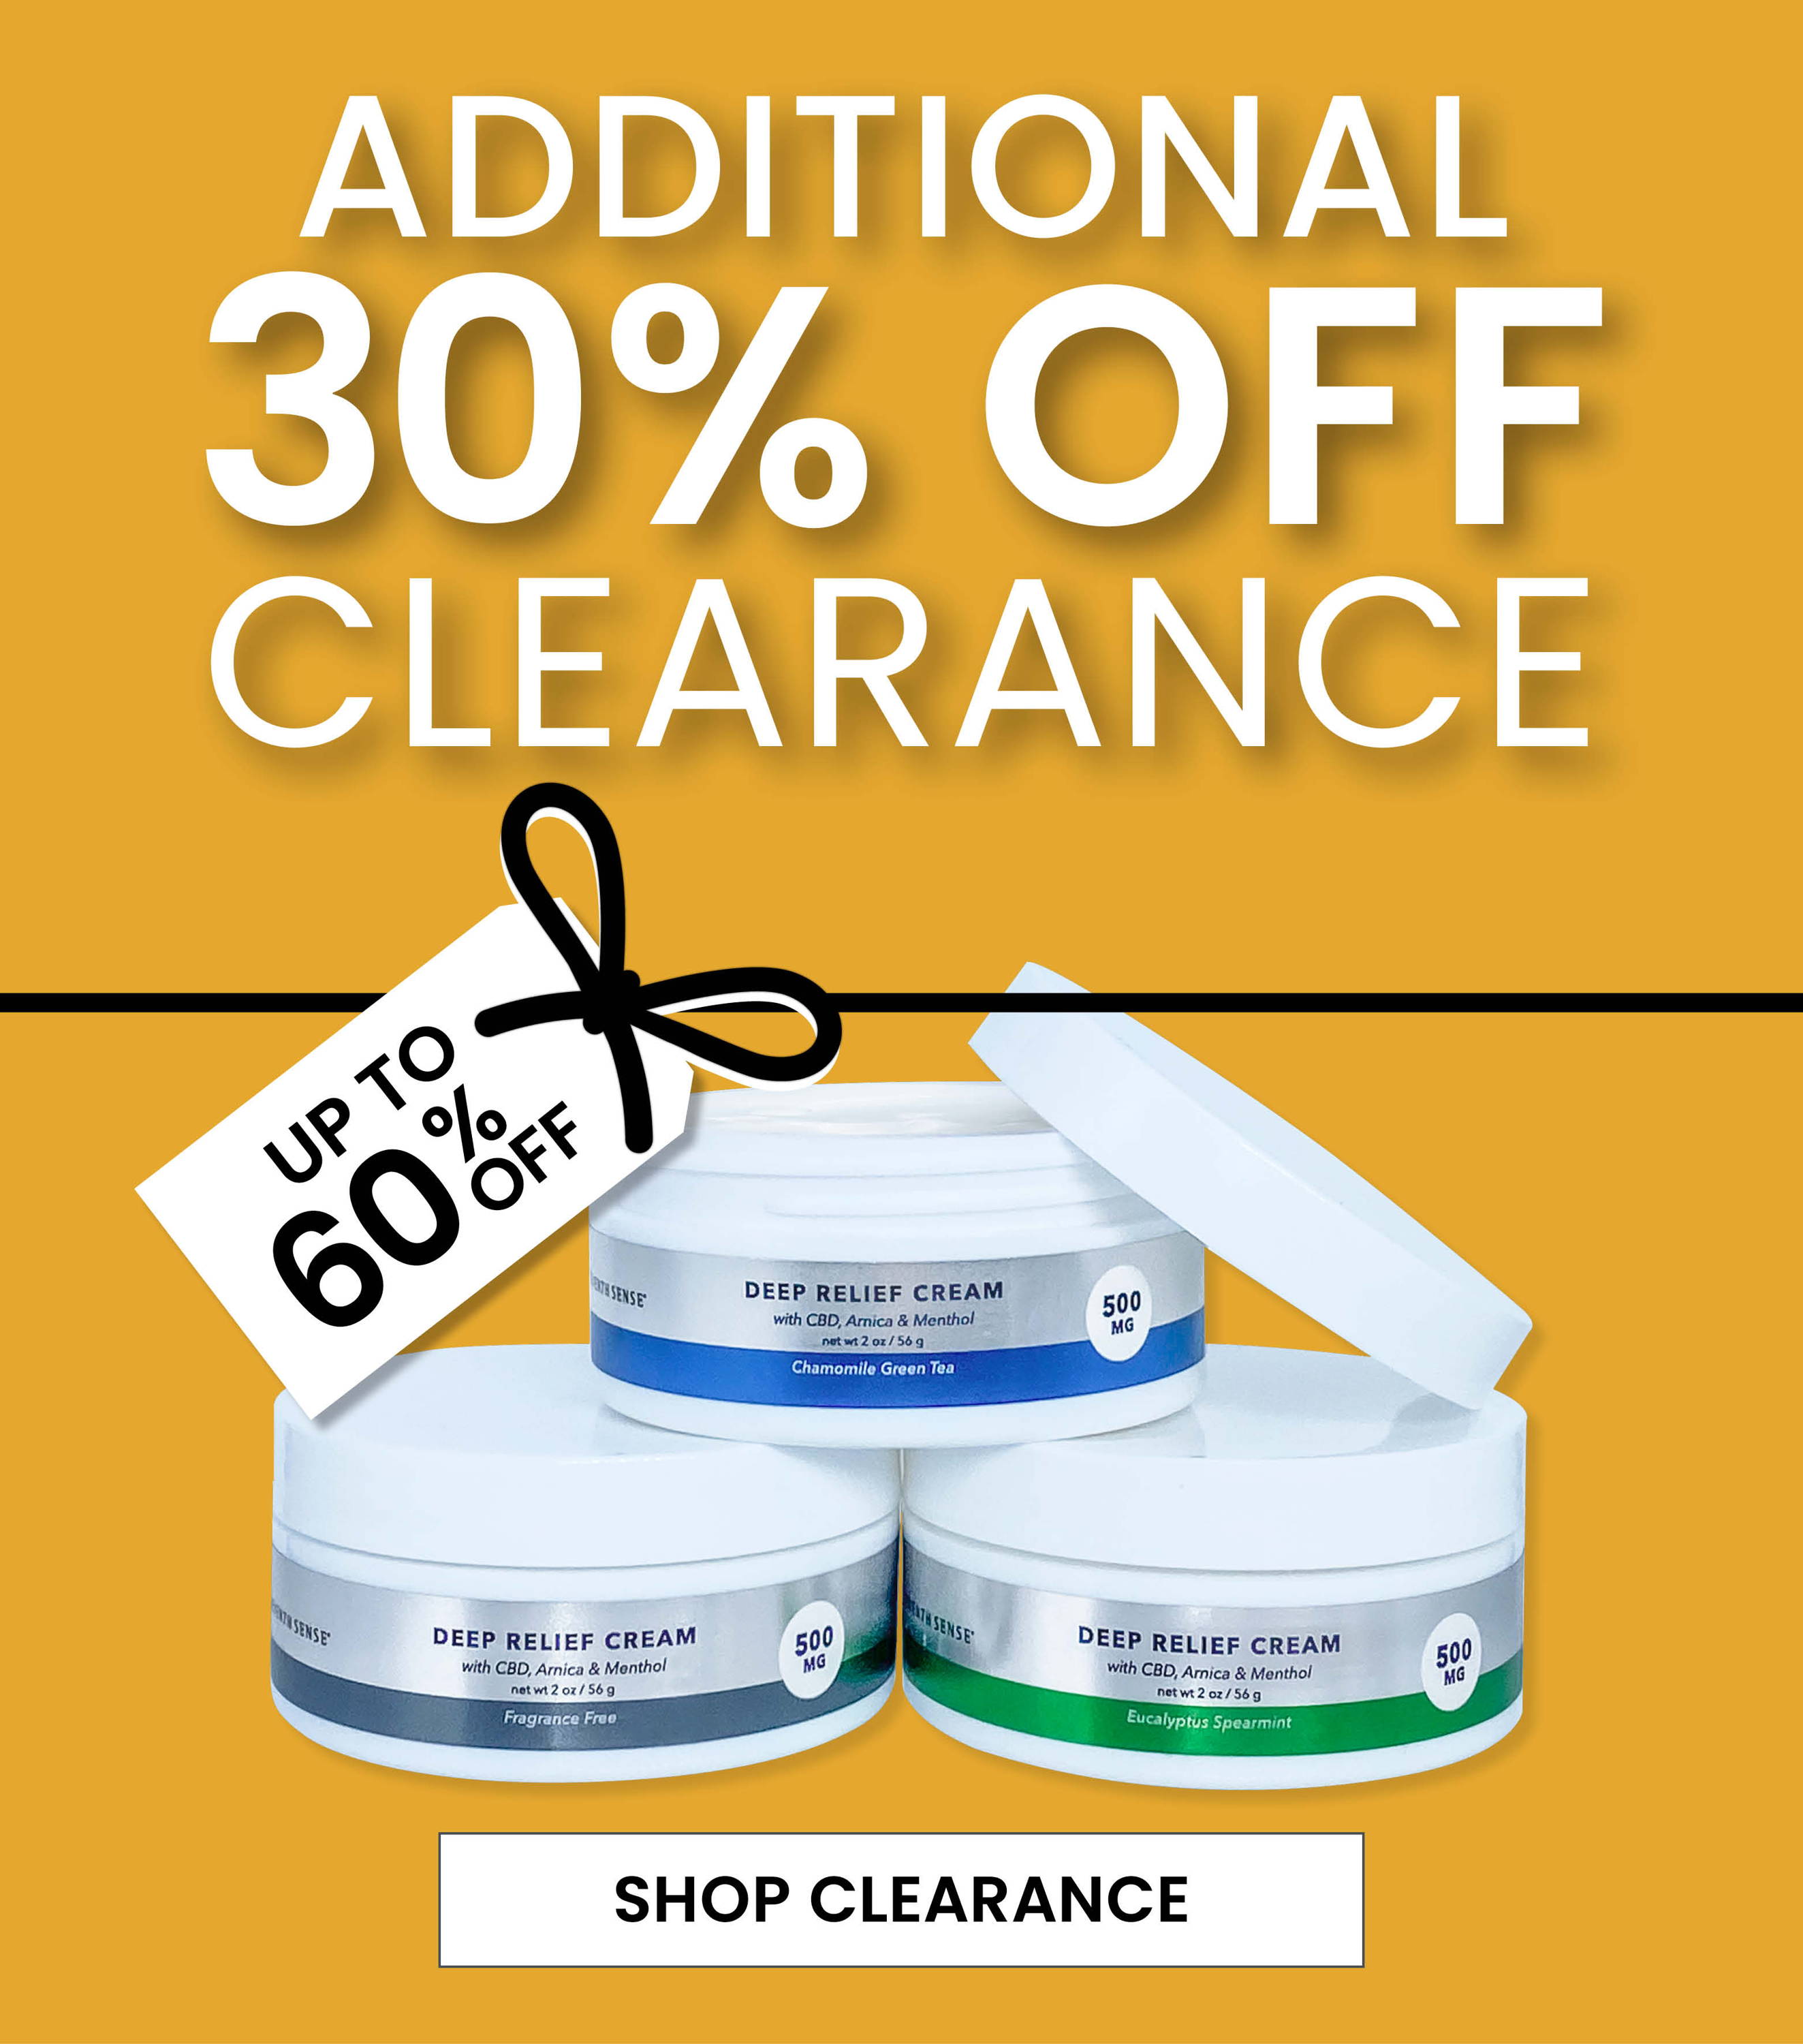 Save an additional 30% Off Clearance prices! Discount will be applied in cart. All Clearance items are final sale. While supplies last.